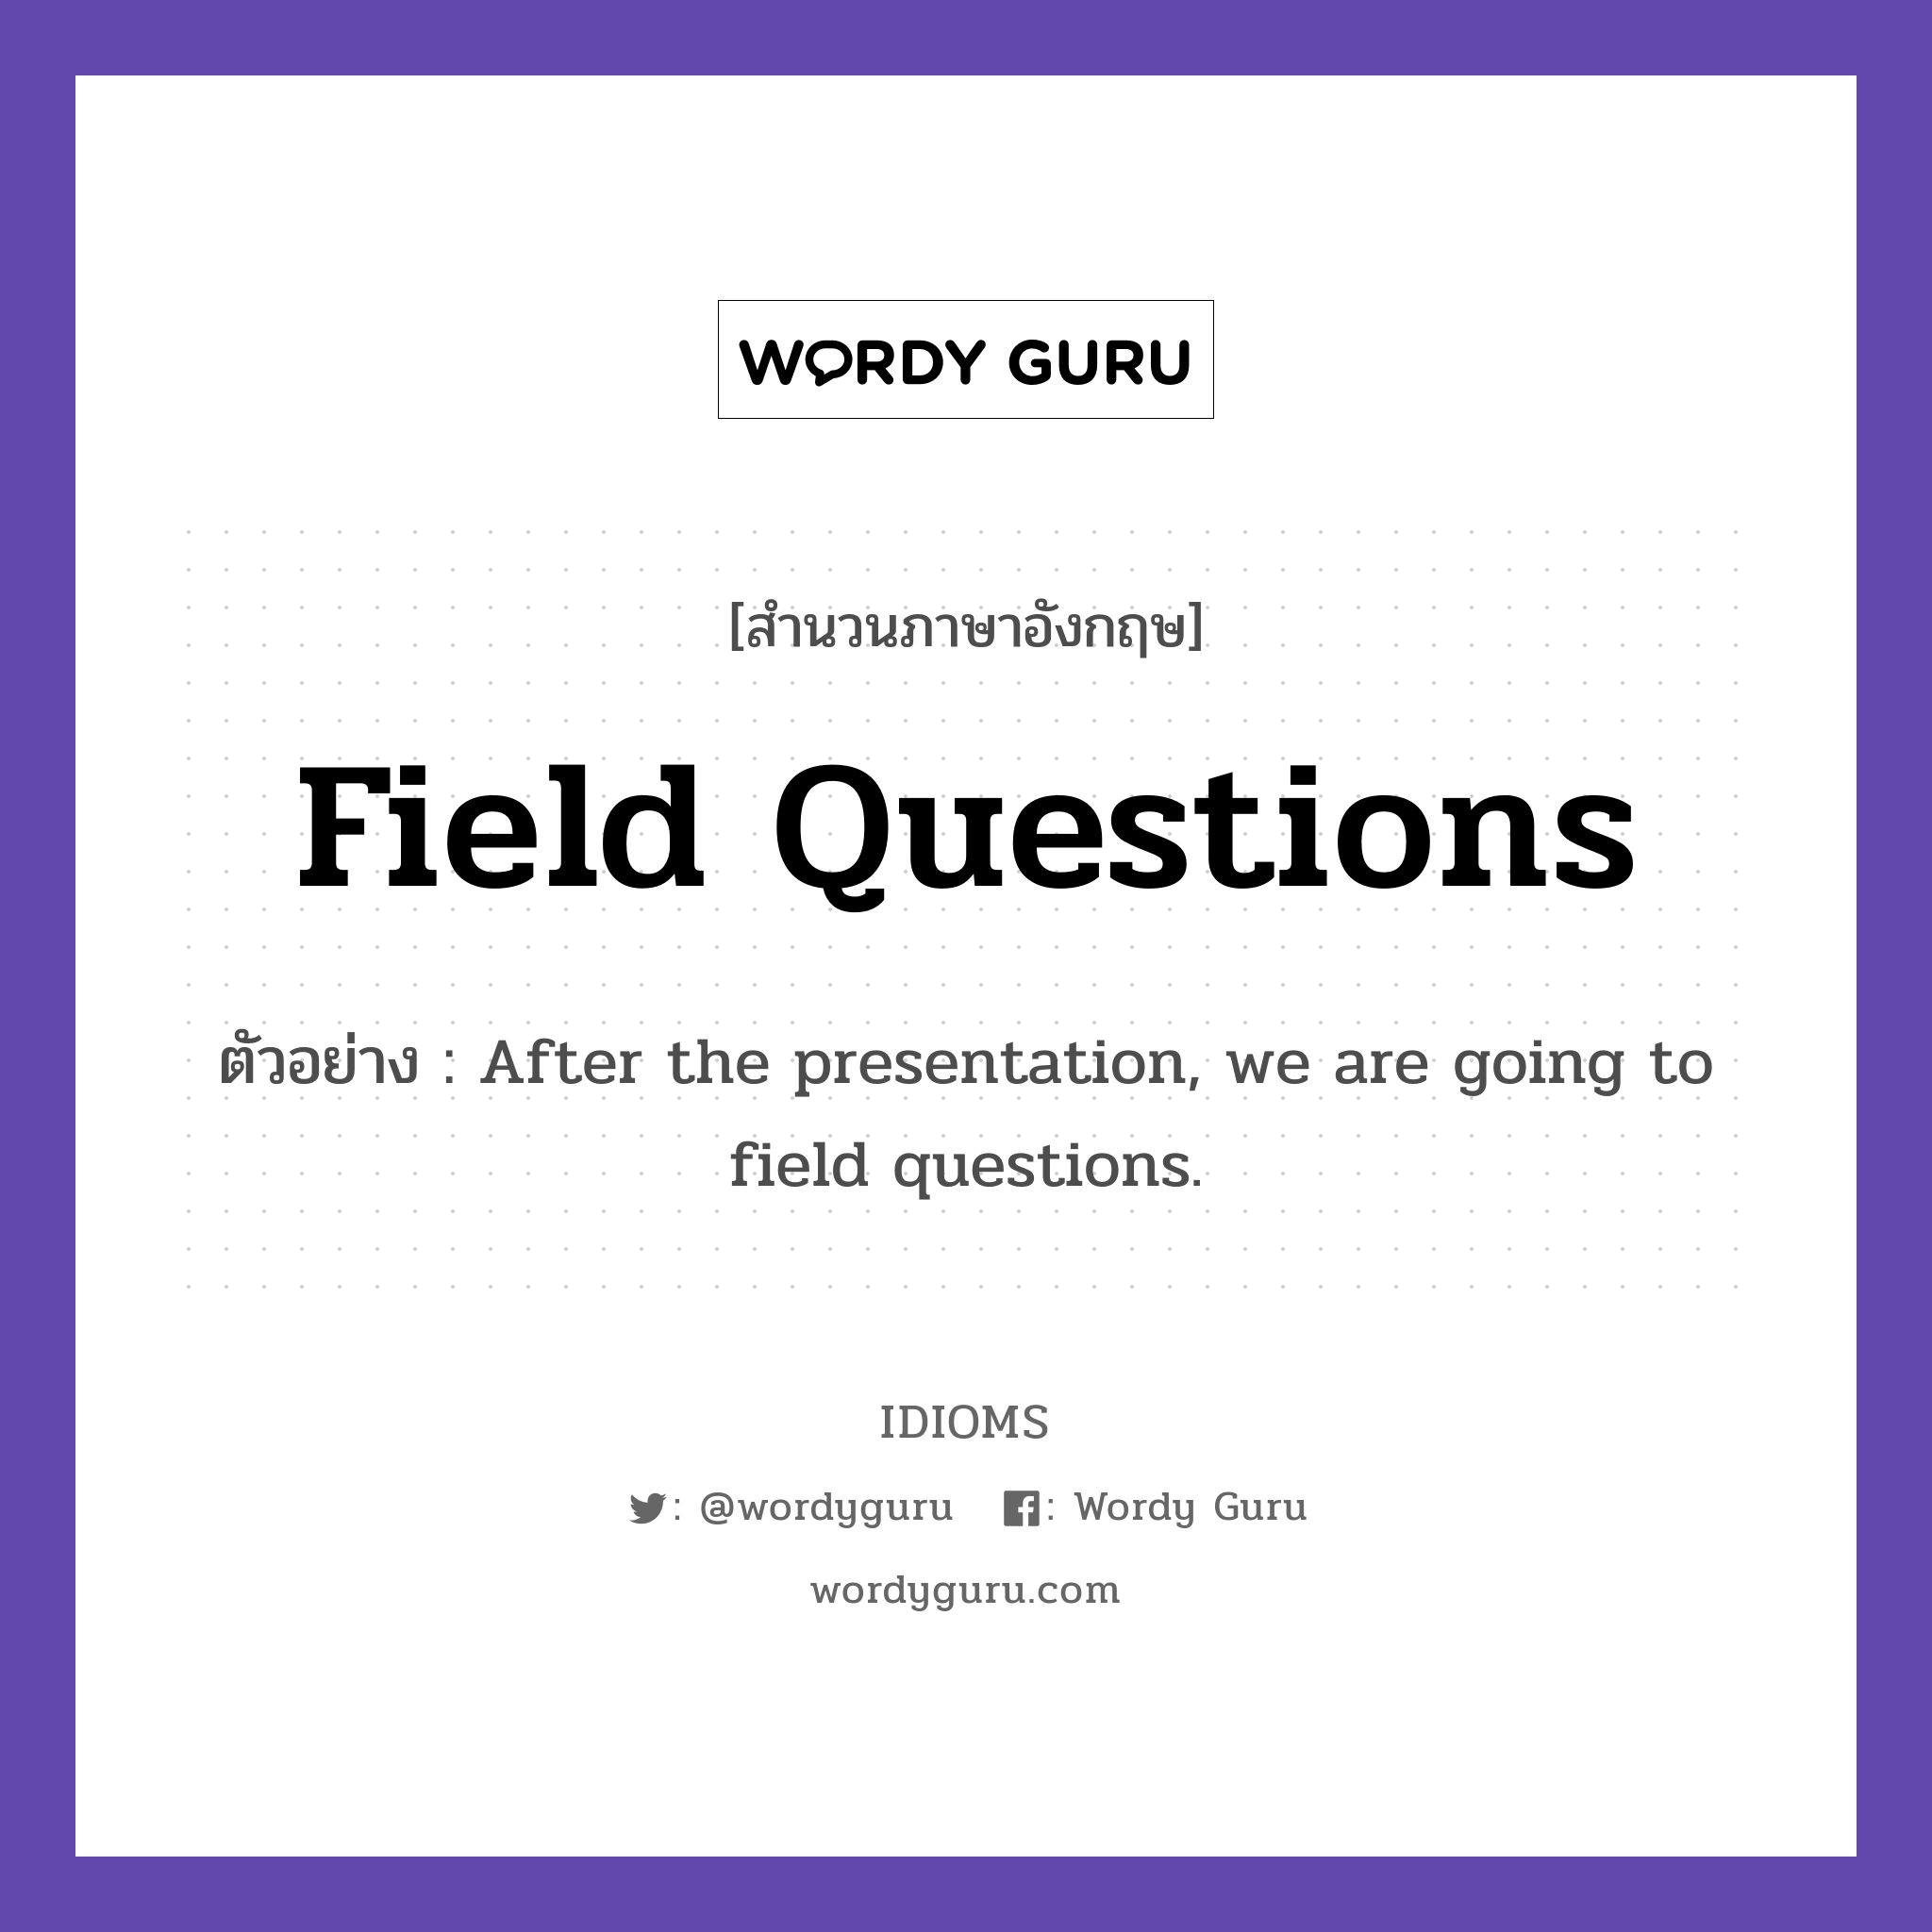 Field Questions แปลว่า?, สำนวนภาษาอังกฤษ Field Questions ตัวอย่าง After the presentation, we are going to field questions.